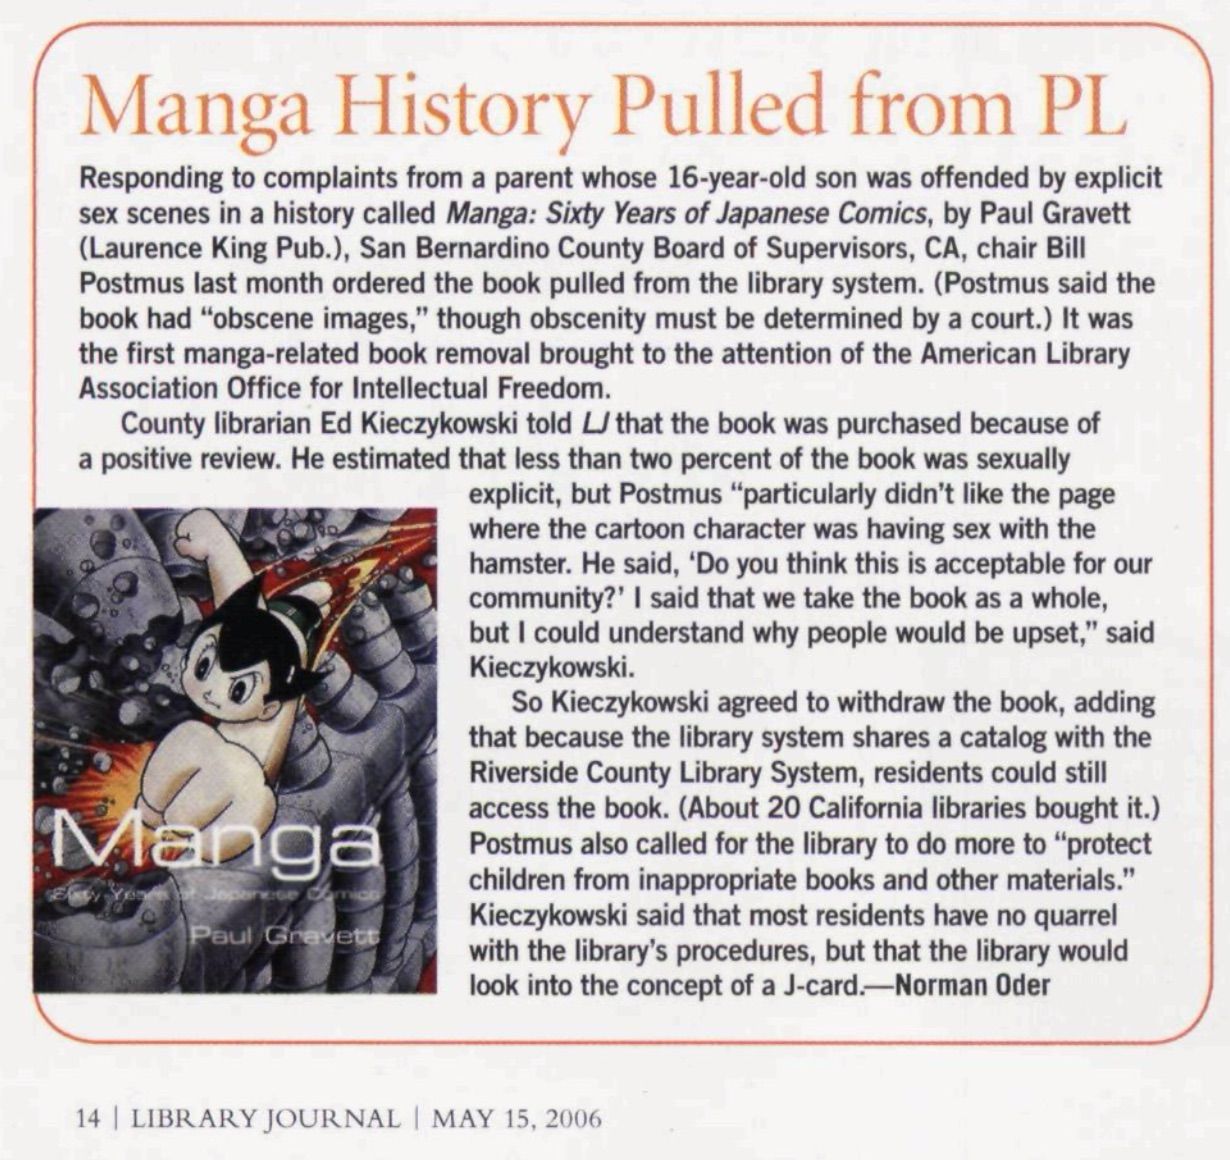 Image of an article from May 15, 2006 Library Journal about a manga guide being pulled from San Bernardino County Library. 